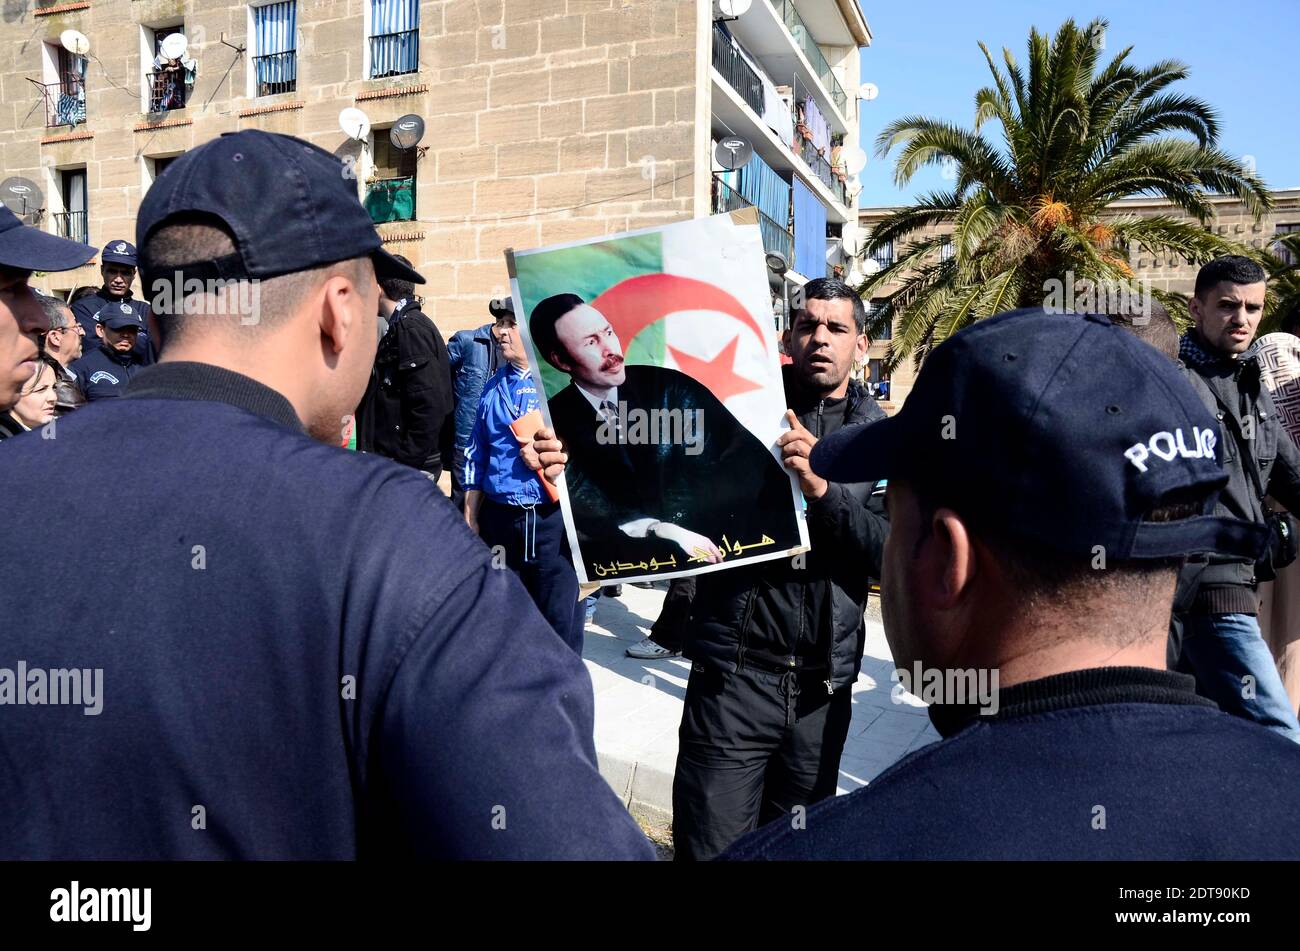 Protesters rally against Algerian presidency election that coming April 17 in Algiers, Algeria on March 12, 2014. Photo by Bilal Bensalem/APP/ABACAPRESS.COM Stock Photo